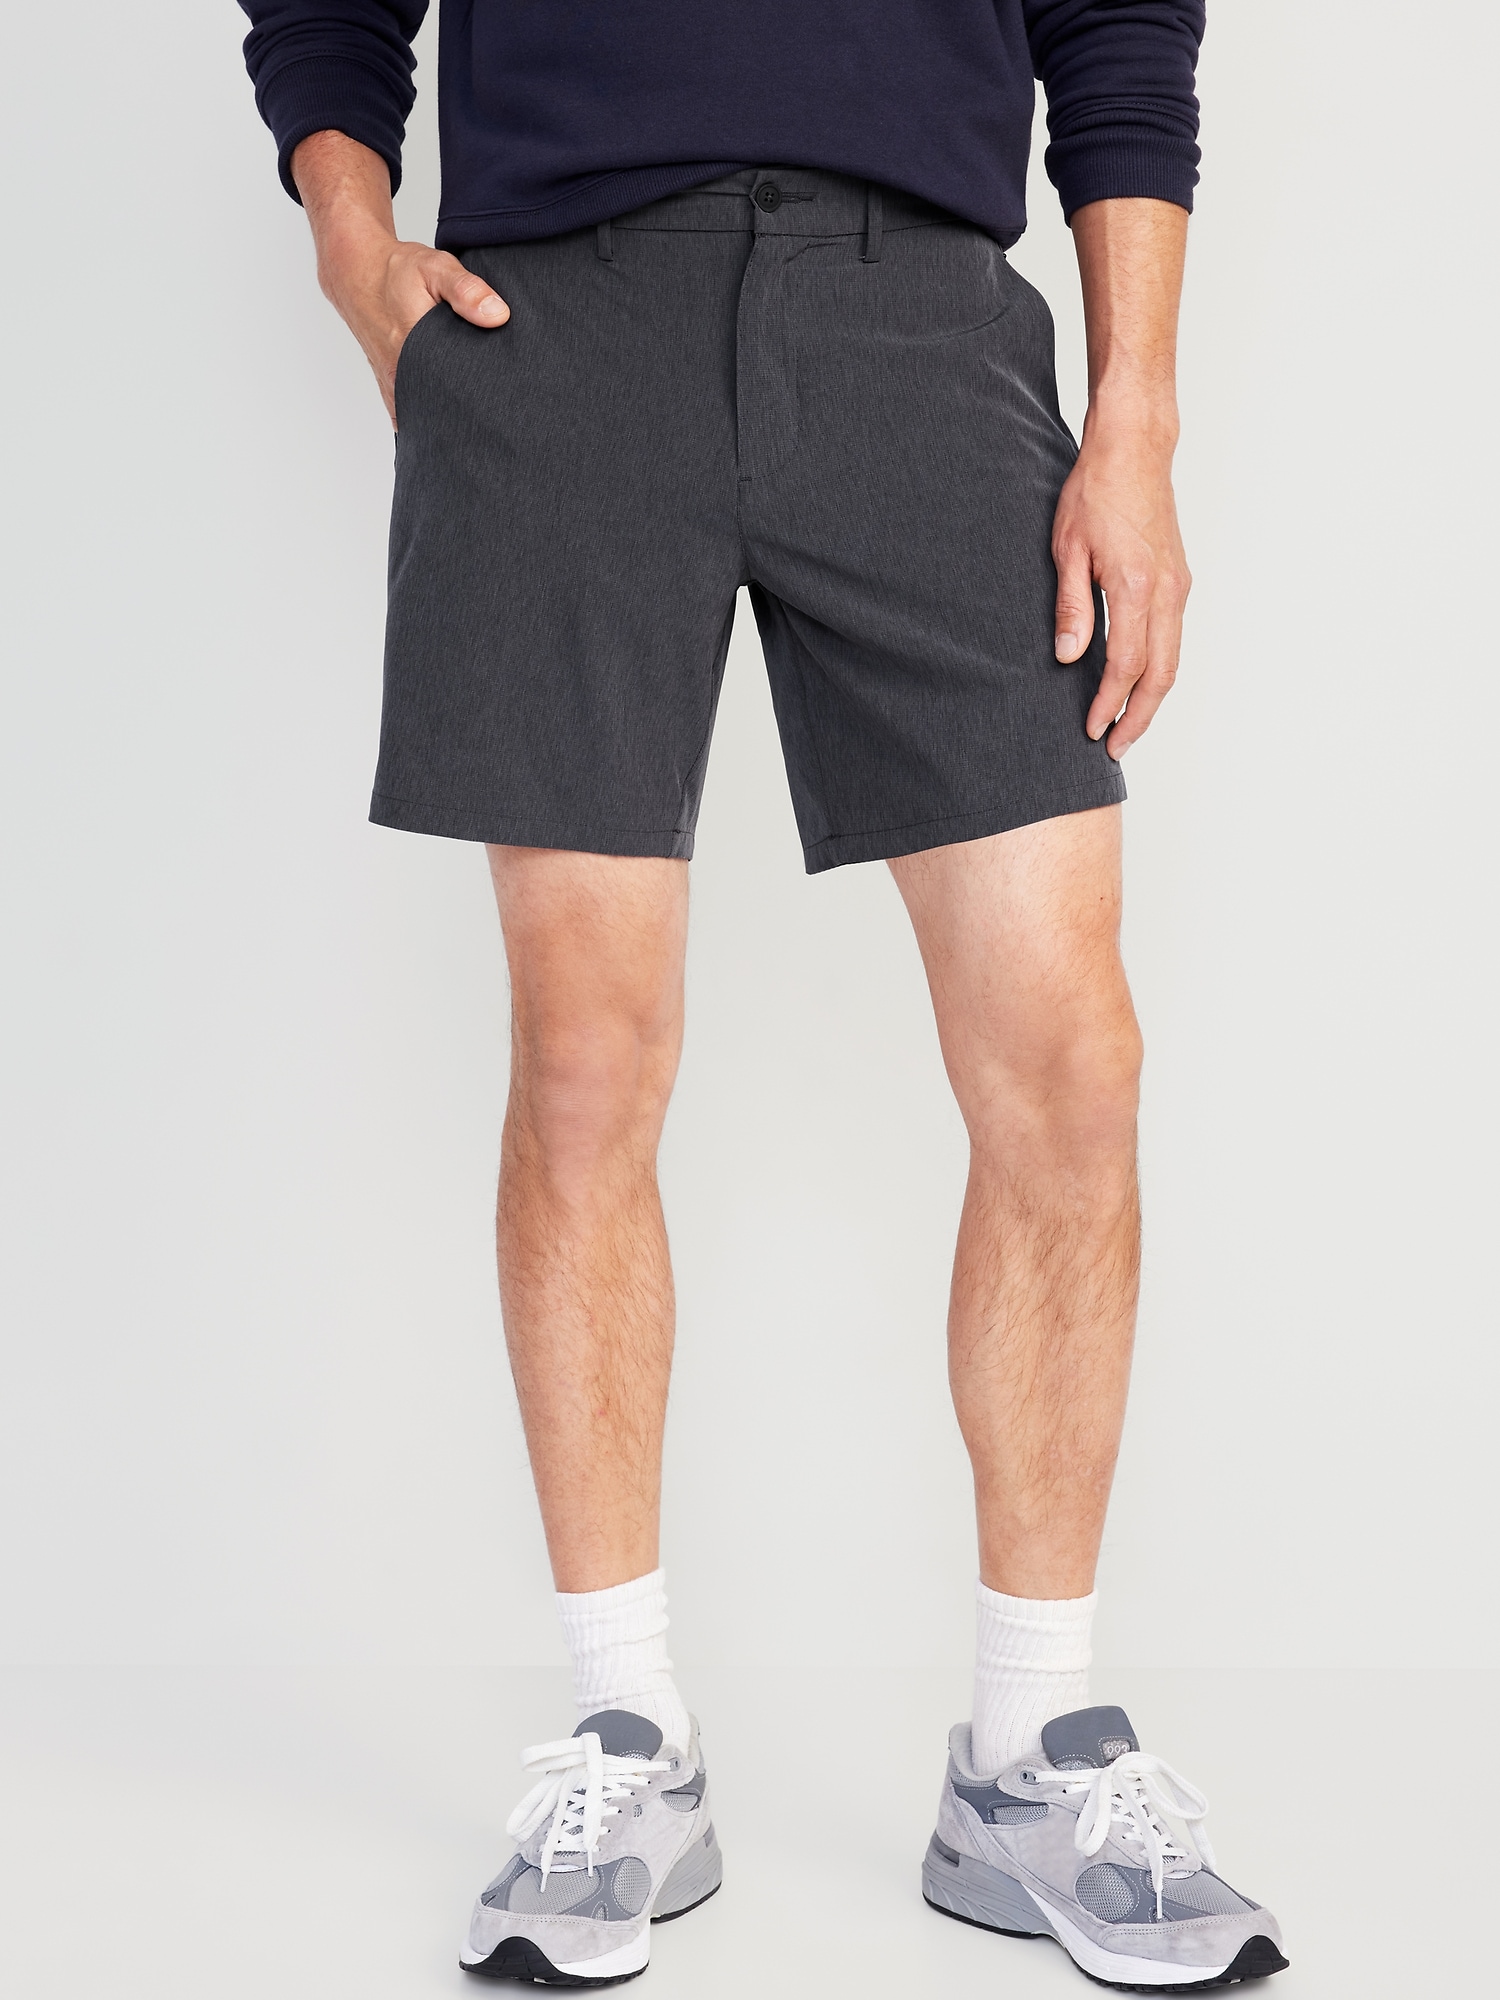 Old Navy Go-Dry Mesh Performance Shorts for Men - 9-inch inseam